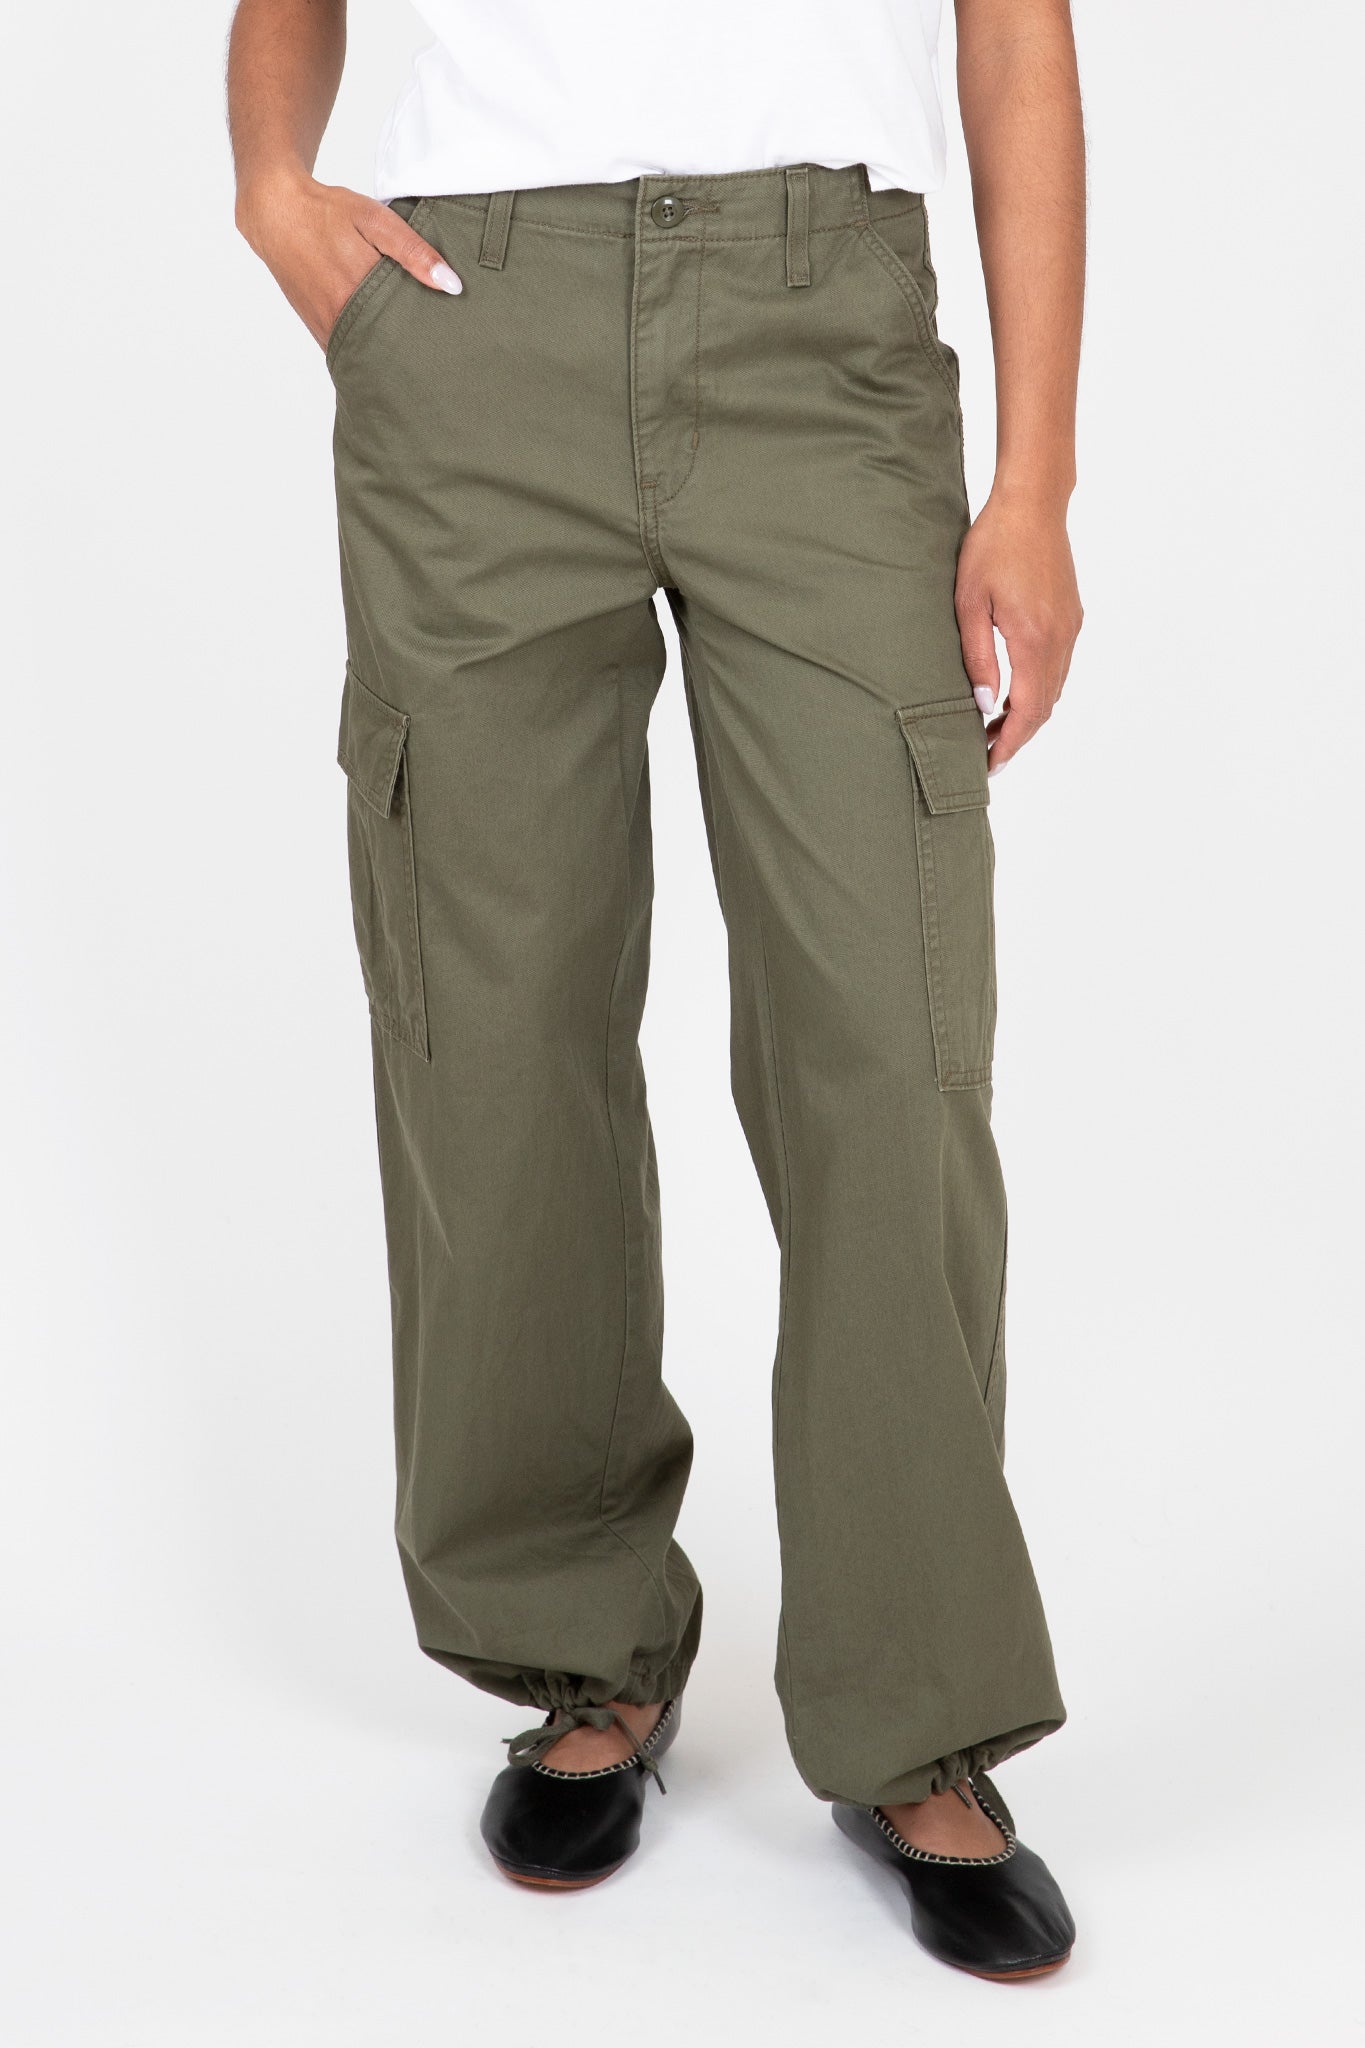 Levis-94-Baggy-Cargo-Pants-Army-Green